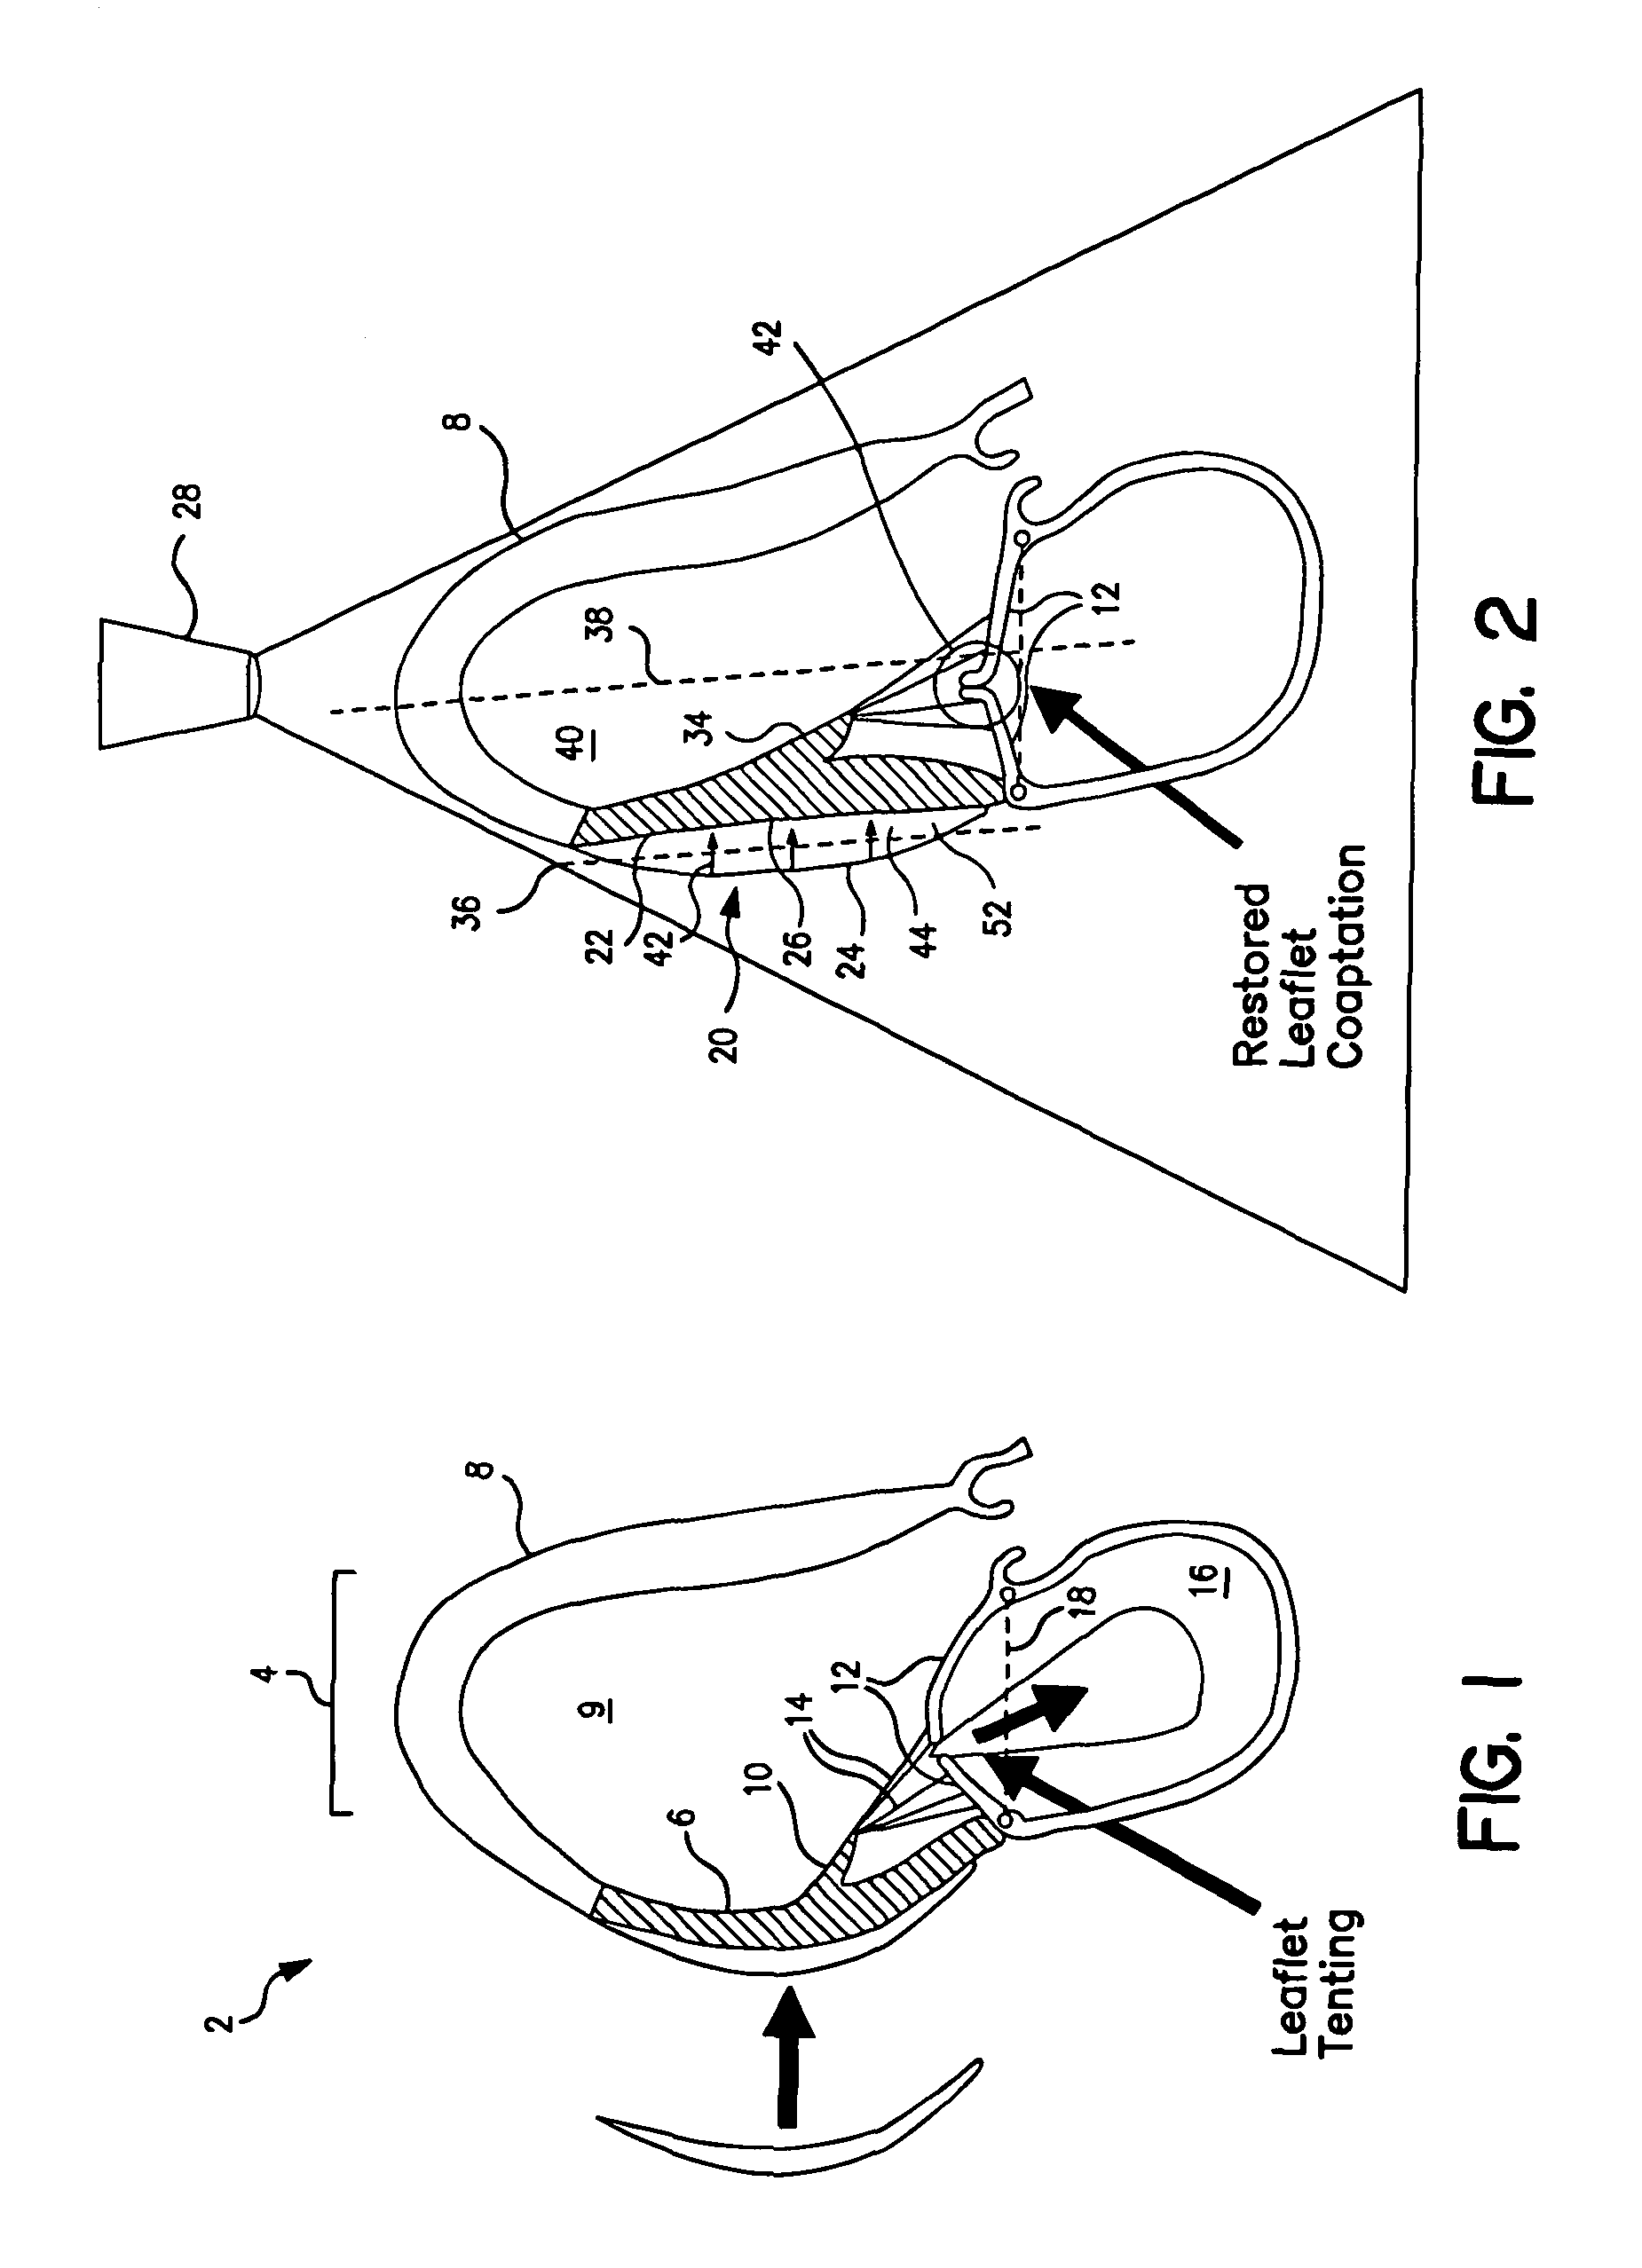 Systems for and methods of repair of atrioventricular valve regurgitation and reversing ventricular remodeling